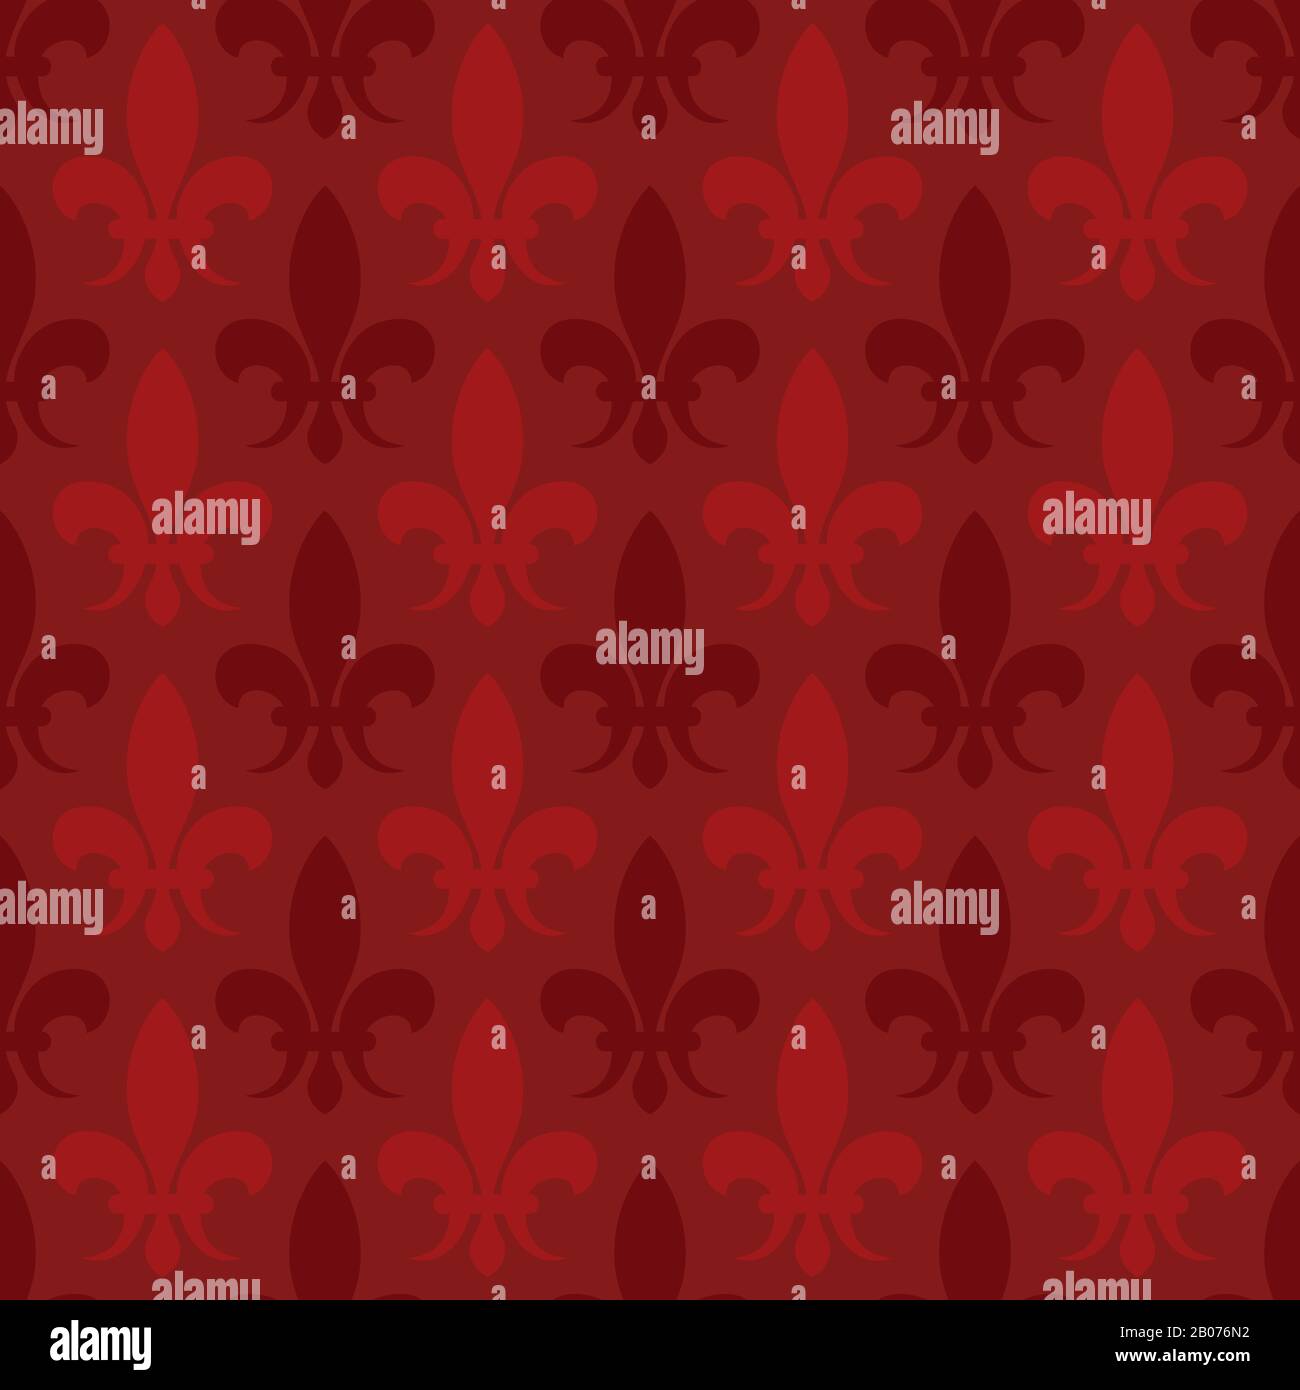 Red vector fleur de lis seamless pattern. Background with lily illustration Stock Vector